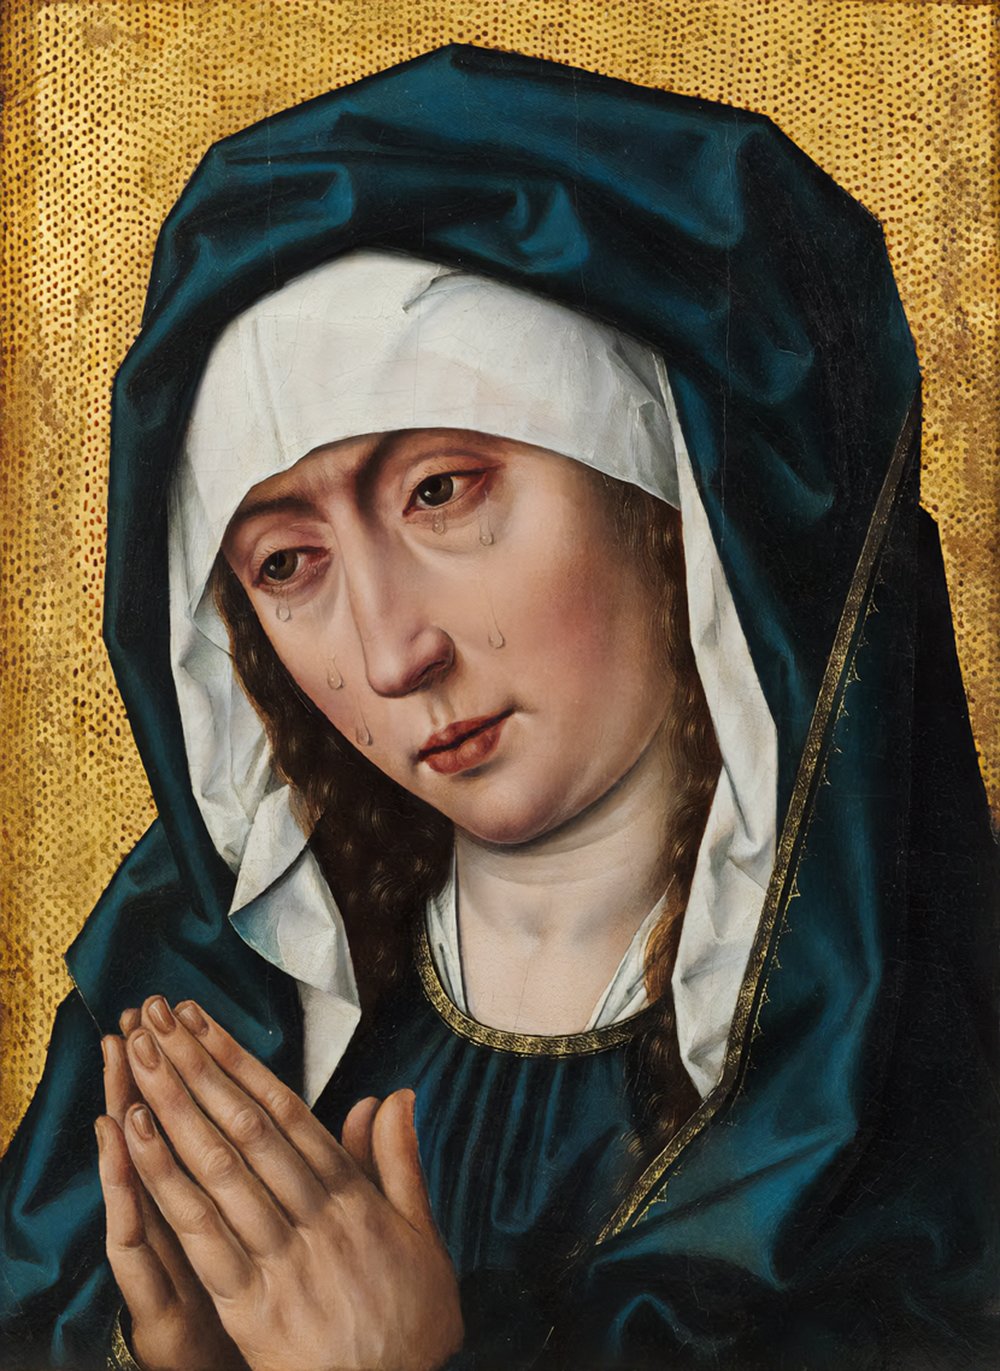 A painting of a woman with tears on her face. She is wearing a blue and white headscarf with a gold trim. The background is a gold color with brown dots. Her hands are clasped in prayer.